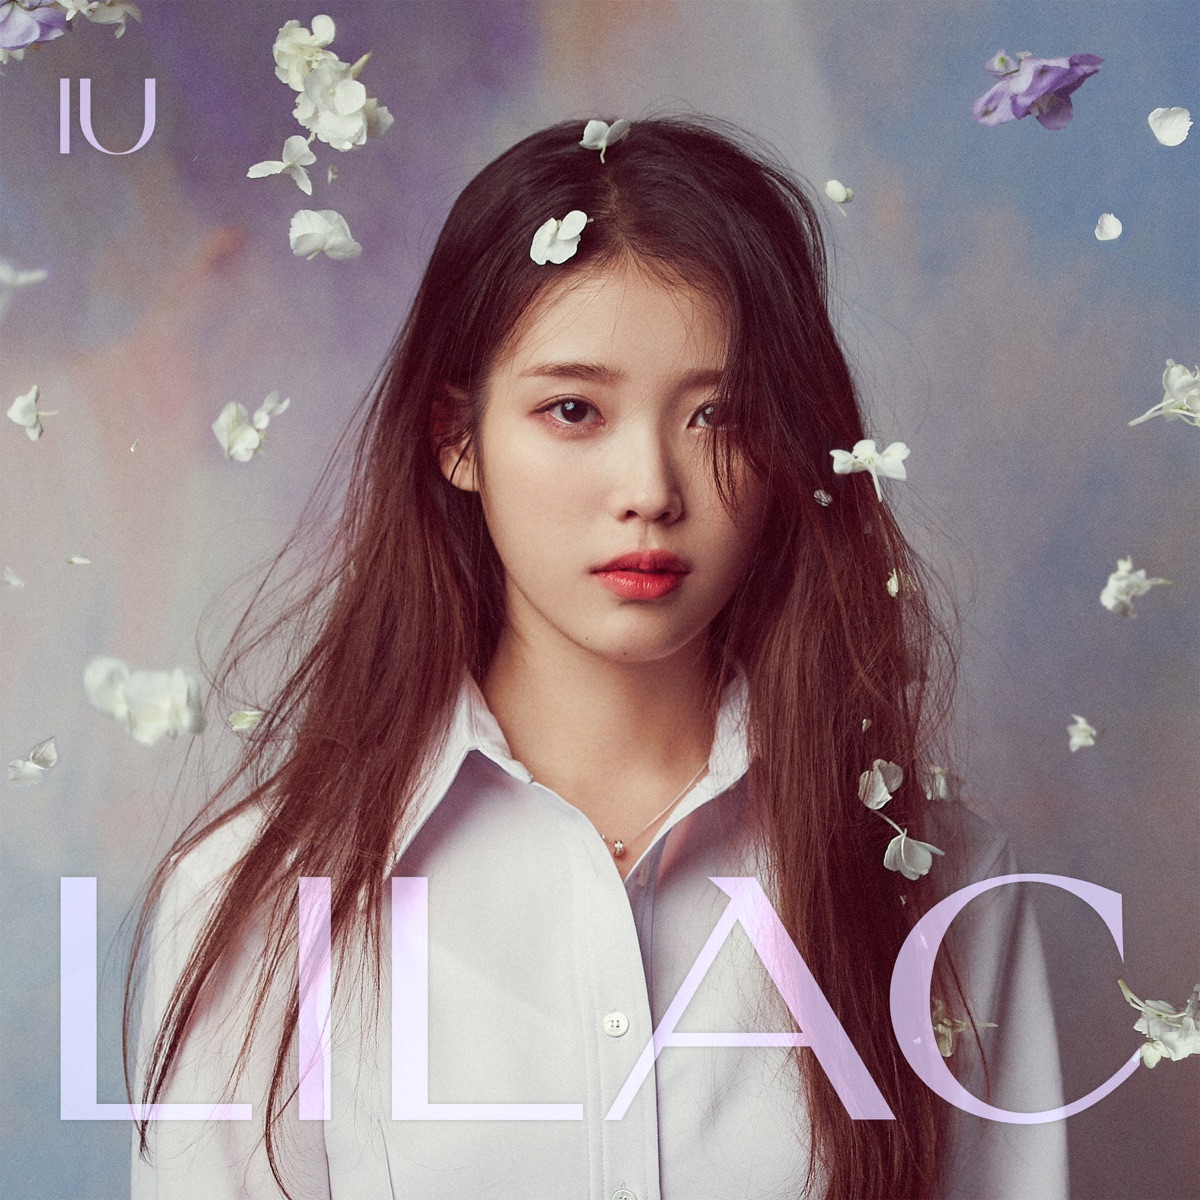 Cover art for『IU - Epilogue』from the release『IU 5th Album 'Lilac'』